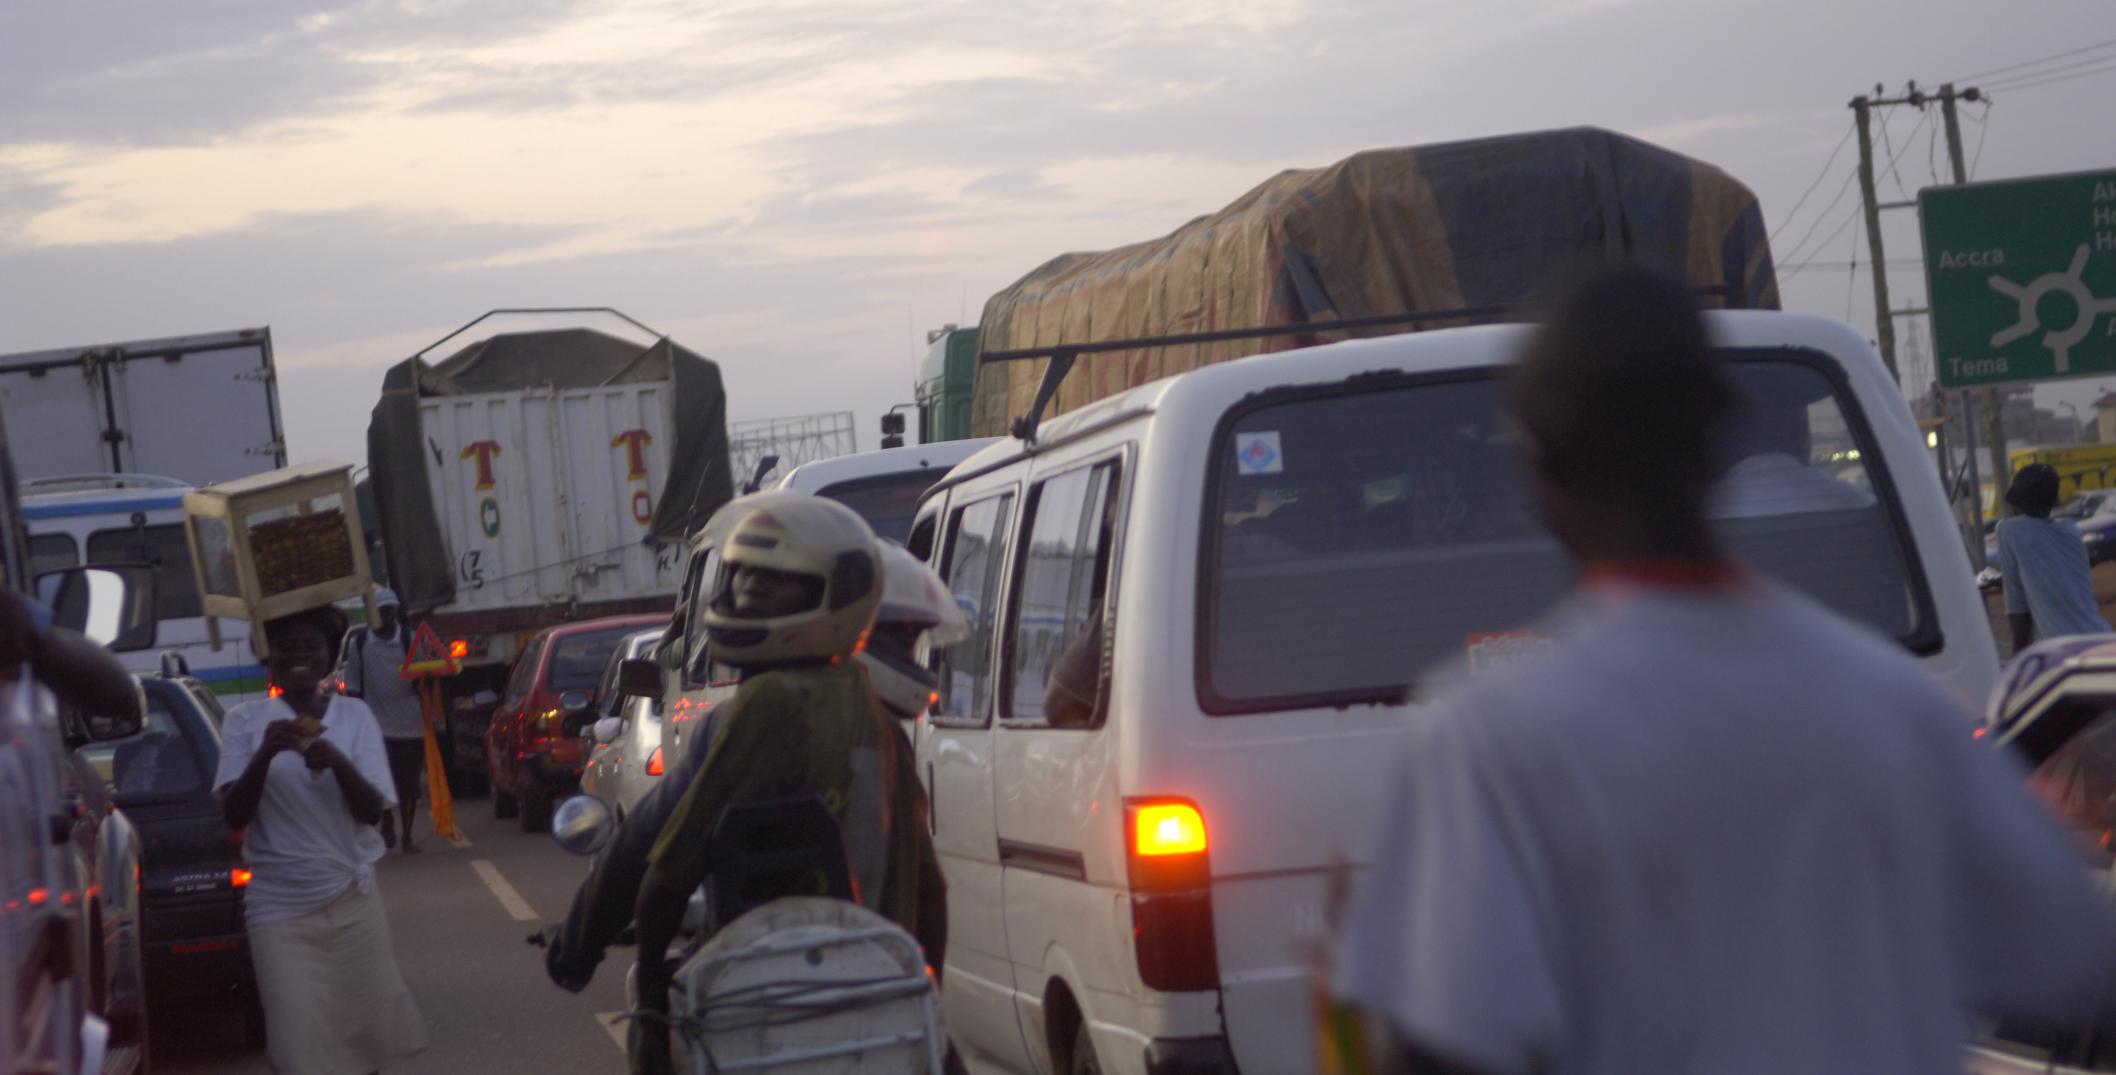 Traffic in Ghana with vendors working between vehicles